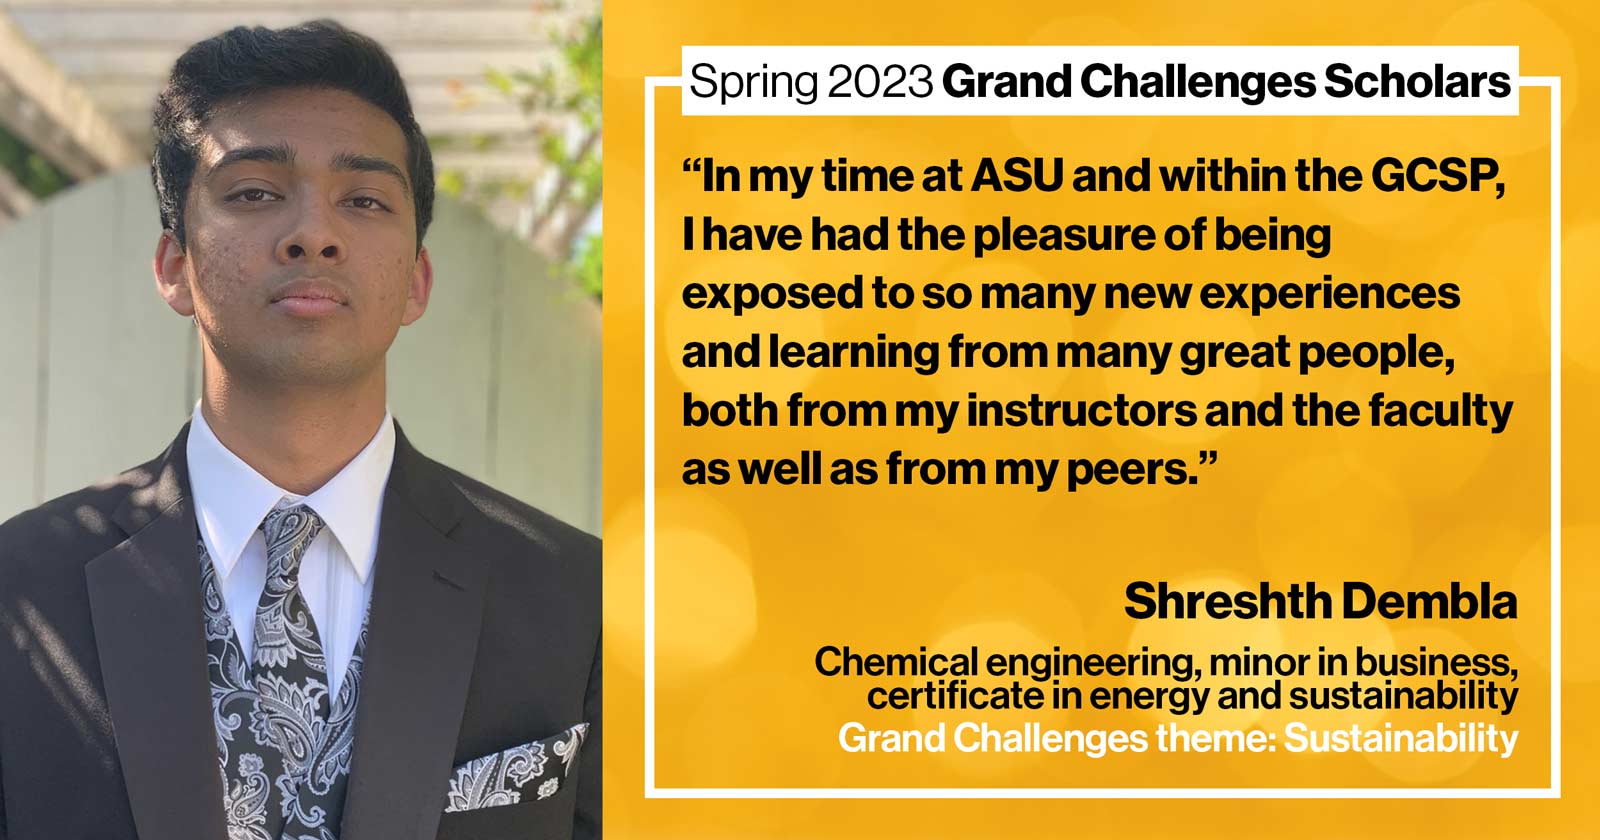 "“In my time at ASU and within the GCSP, I have had the pleasure of being exposed to so many new experiences and learning from many great people, both from my instructors and the faculty as well as from my peers.” "Shreshth Dembla Chemical engineering, business minor Grand Challenge: Sustainability"